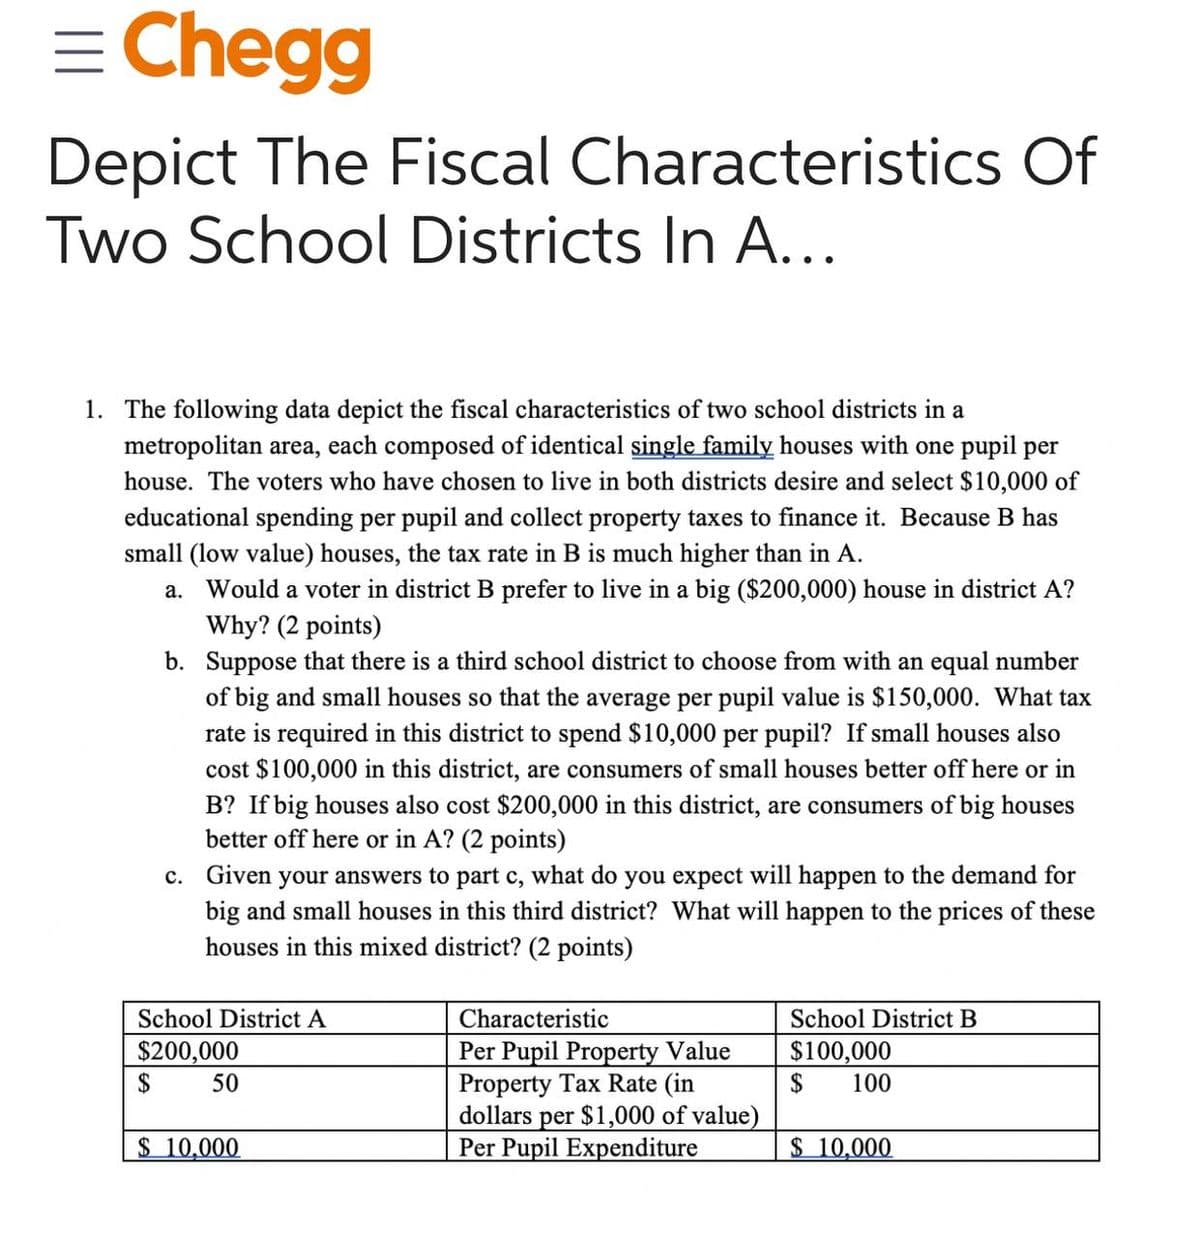 = Chegg
Depict The Fiscal Characteristics Of
Two School Districts In A...
1. The following data depict the fiscal characteristics of two school districts in a
metropolitan area, each composed of identical single family houses with
pupil per
house. The voters who have chosen to live in both districts desire and select $10,000 of
educational spending per pupil and collect property taxes to finance it. Because B has
small (low value) houses, the tax rate in B is much higher than in A.
a. Would a voter in district B prefer to live in a big ($200,000) house in district A?
Why? (2 points)
b.
Suppose that there is a third school district to choose from with an equal number
of big and small houses so that the average per pupil value is $150,000. What tax
rate is required in this district to spend $10,000 per pupil? If small houses also
cost $100,000 in this district, are consumers of small houses better off here or in
B? If big houses also cost $200,000 in this district, are consumers of big houses
better off here or in A? (2 points)
c. Given your answers to part c, what do you expect will happen to the demand for
big and small houses in this third district? What will happen to the prices of these
houses in this mixed district? (2 points)
School District A
$200,000
$
50
$10,000
Characteristic
Per Pupil Property Value
Property Tax Rate (in
dollars per $1,000 of value)
Per Pupil Expenditure
School District B
$100,000
$
100
$10,000